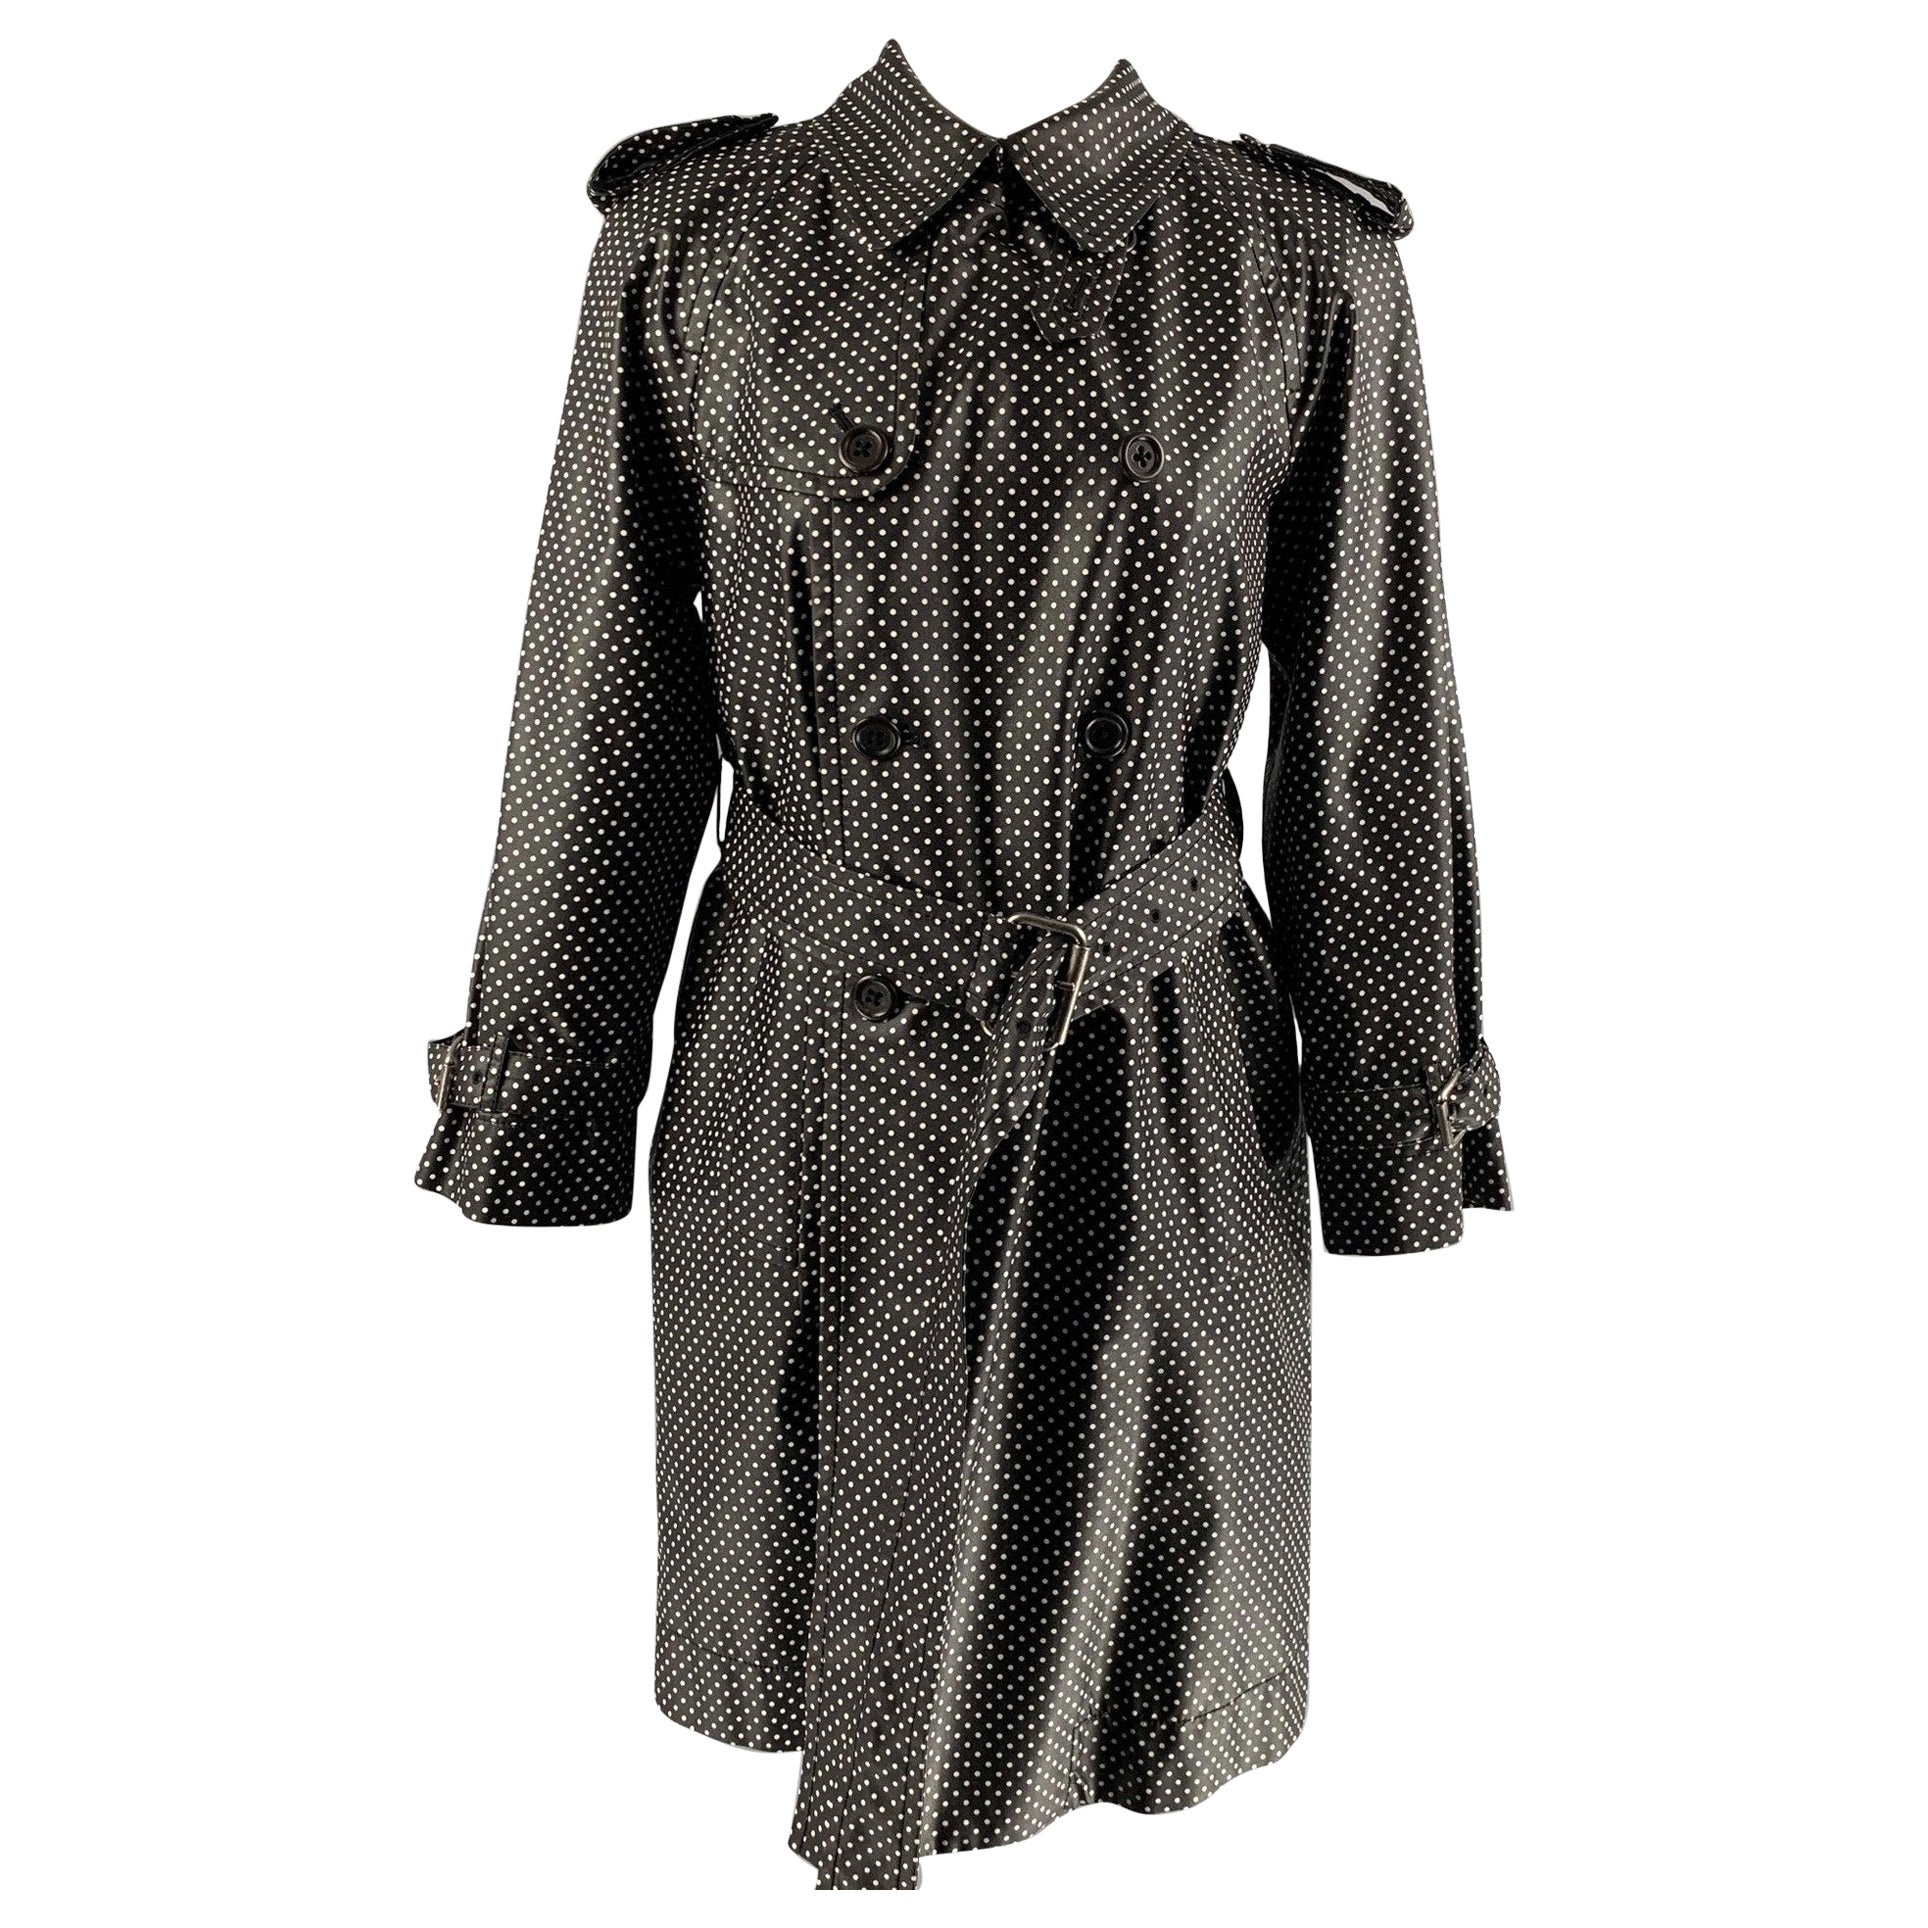 MARC JACOBS Size 4 Black & White Silk Blend Polka Dot Belted Trench Coat For Sale